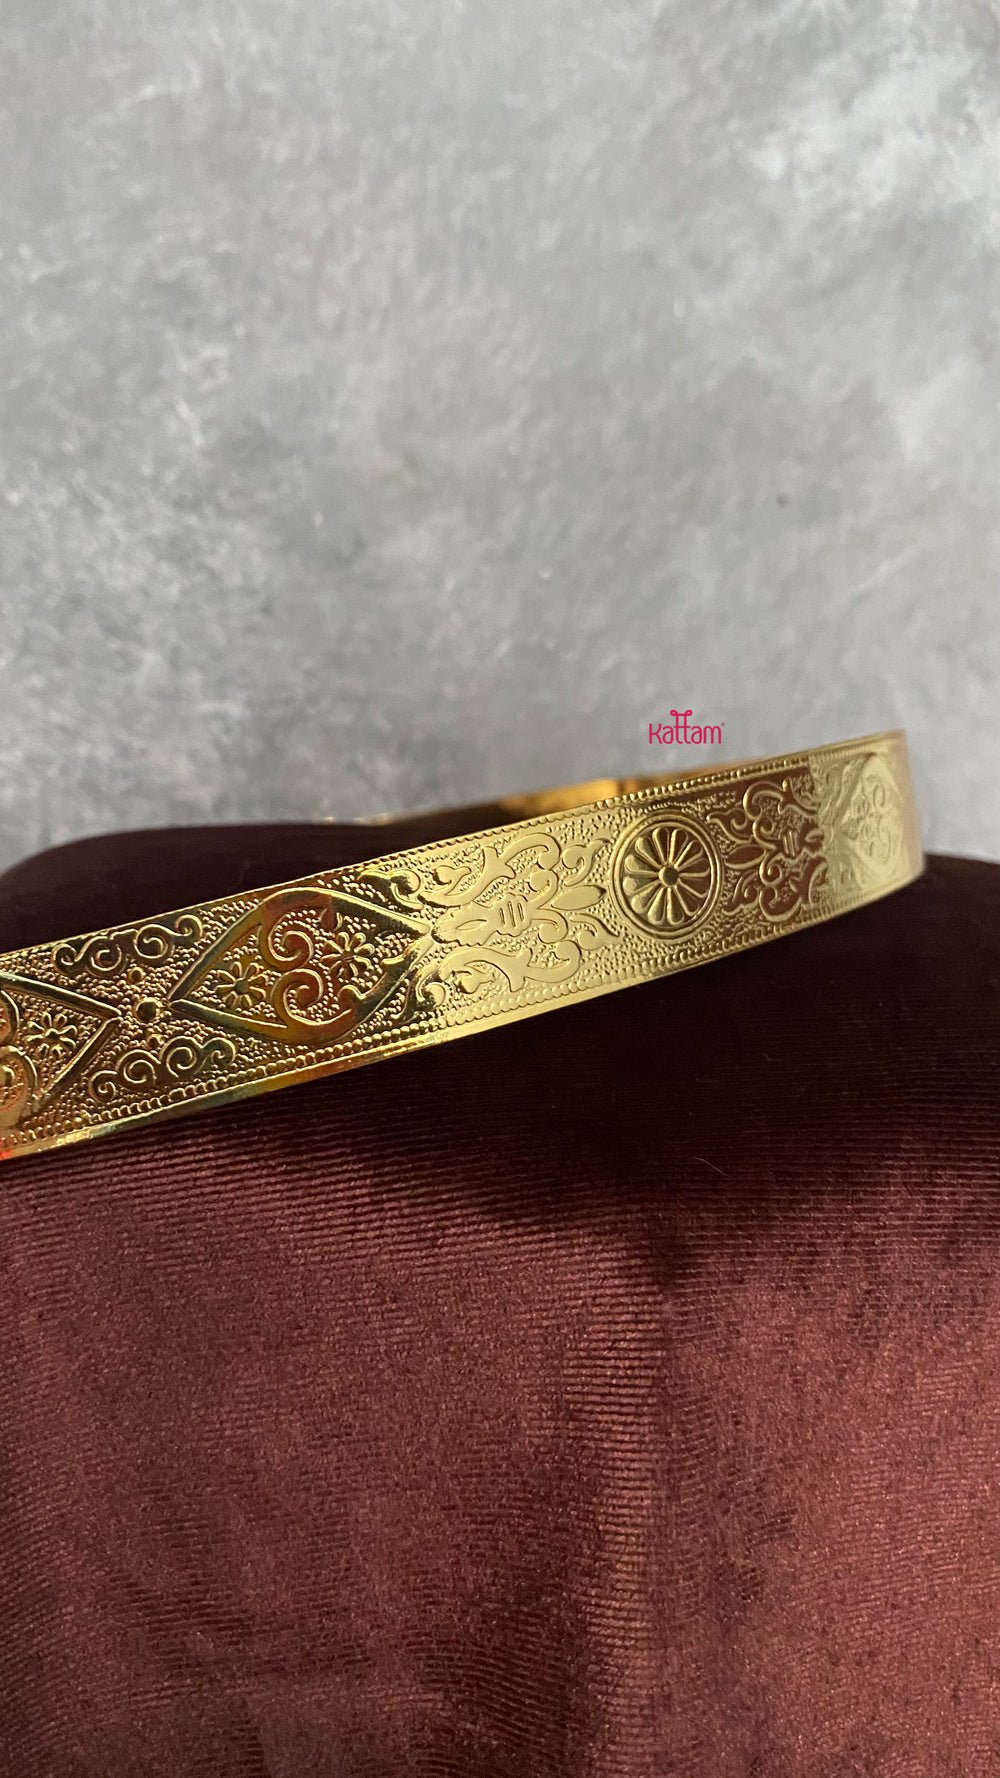 Engraved Jali Belt ( Baby & Adult Size Available ) - HB020